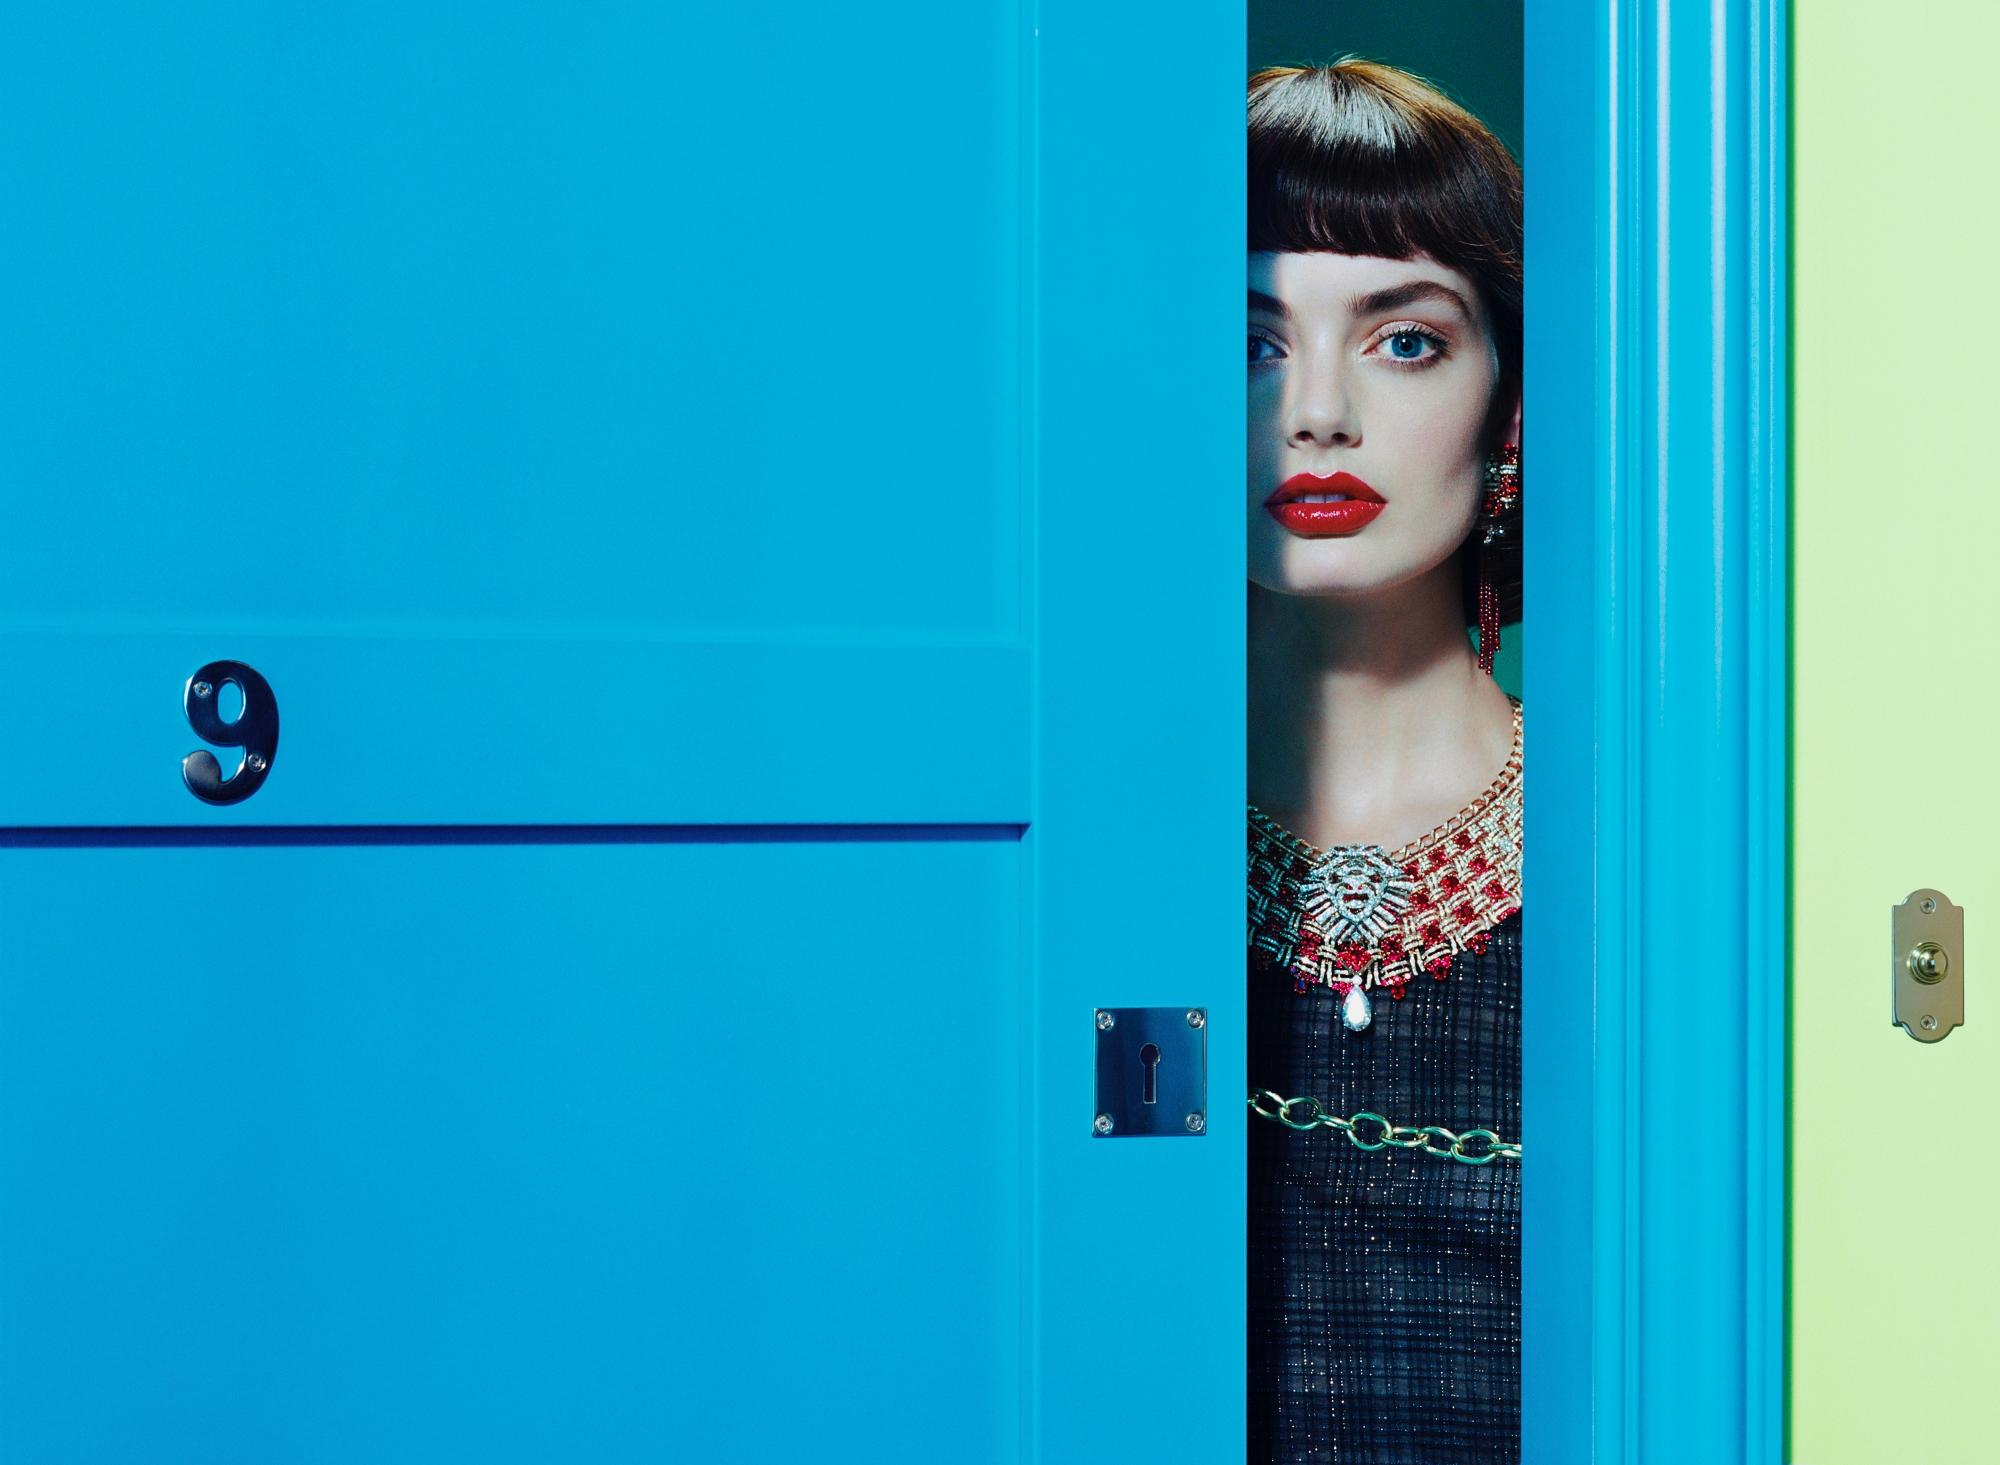 MILES ALDRIDGE (*1964, Great Britain) 
Doors #3, 2023
Screenprint in colours
Sheet 73 x 100 cm (28 3/4 x 39 3/8 in.)
Edition of 15, plus 3 AP; Ed. no. 1/15
Print only


A fiercely original photographer, Miles Aldridge (*1964, Great Britain) is best